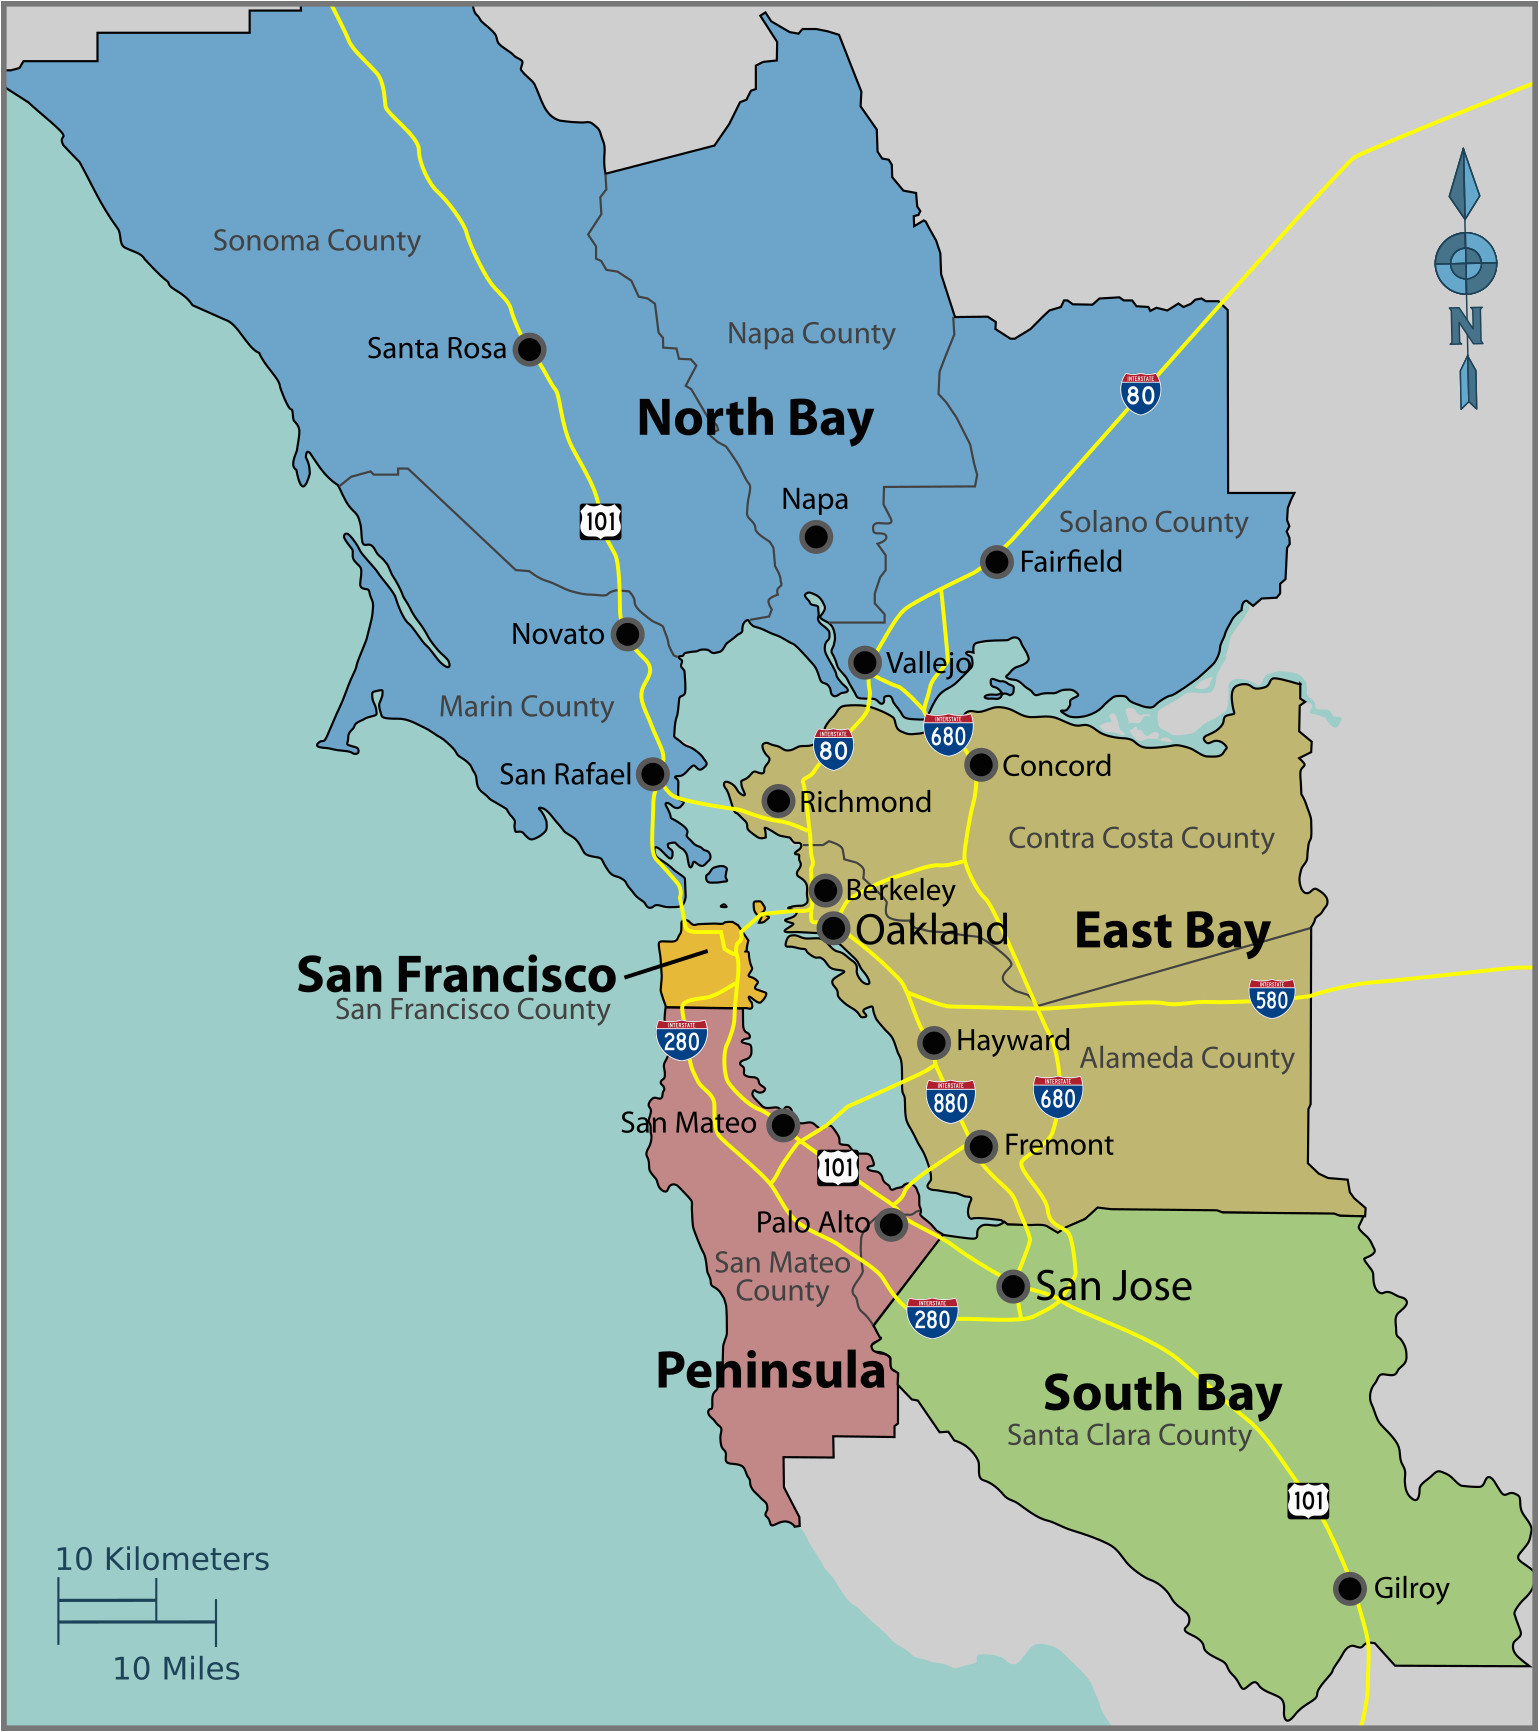 Where Is San Mateo California On The Map San Francisco Bay Area Wikipedia Of Where Is San Mateo California On The Map 